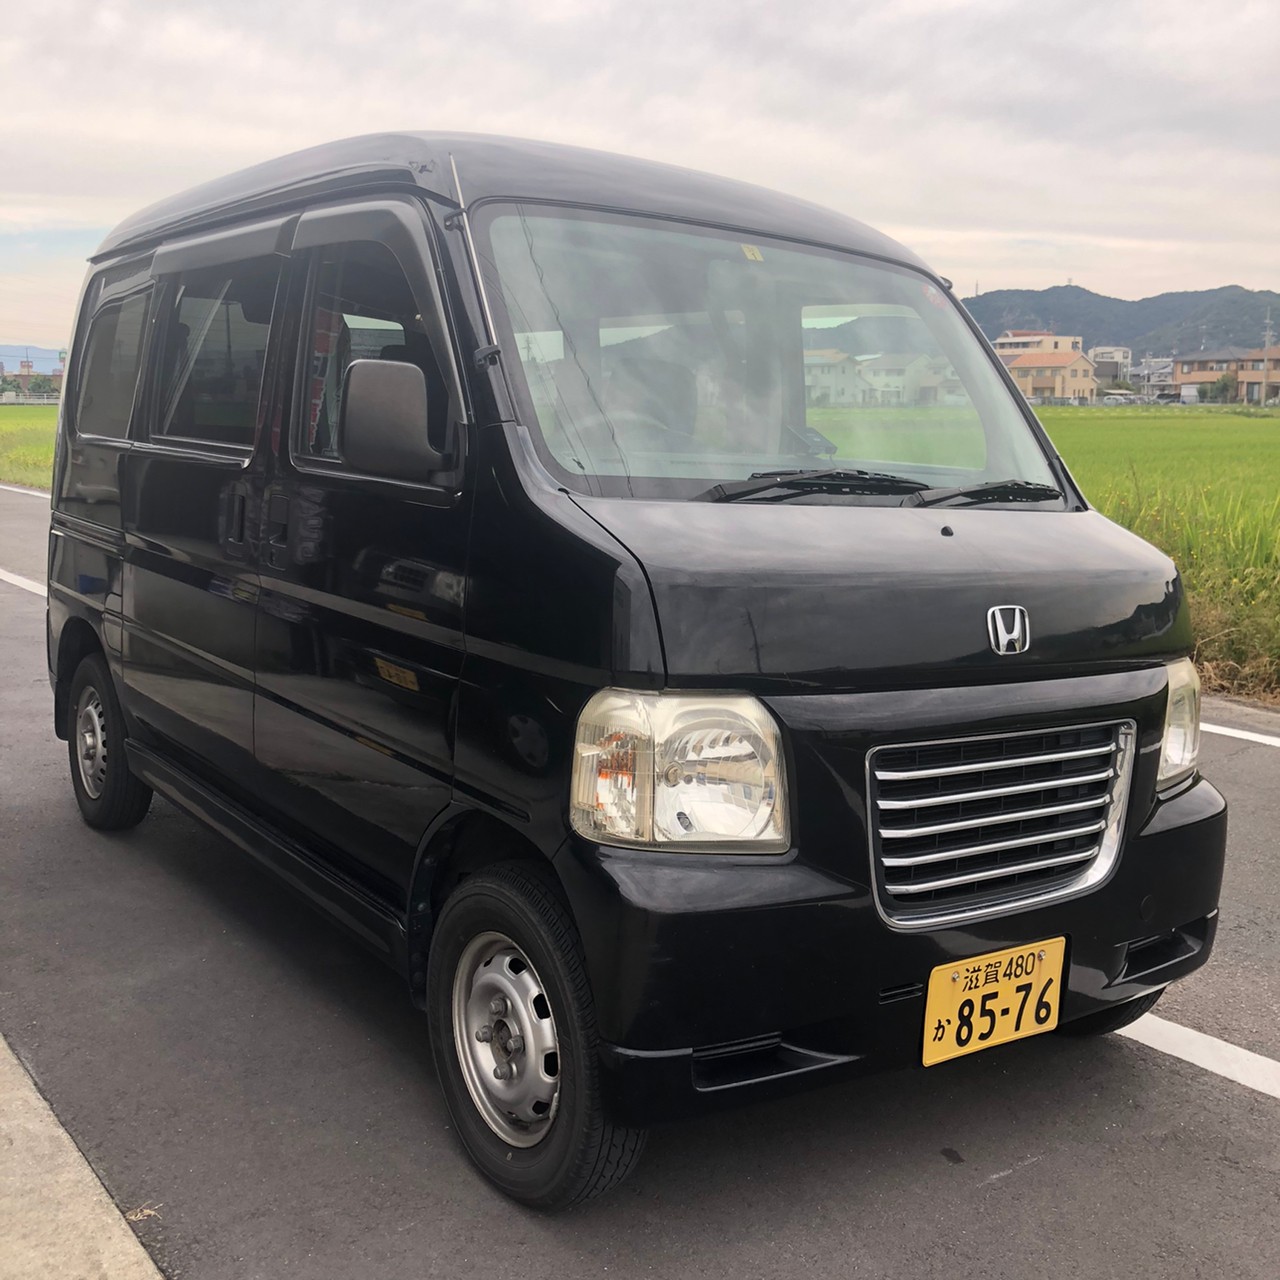 sold】総額9.9万円☆人気の箱バン☆4WD☆平成21年式 ホンダ バモス